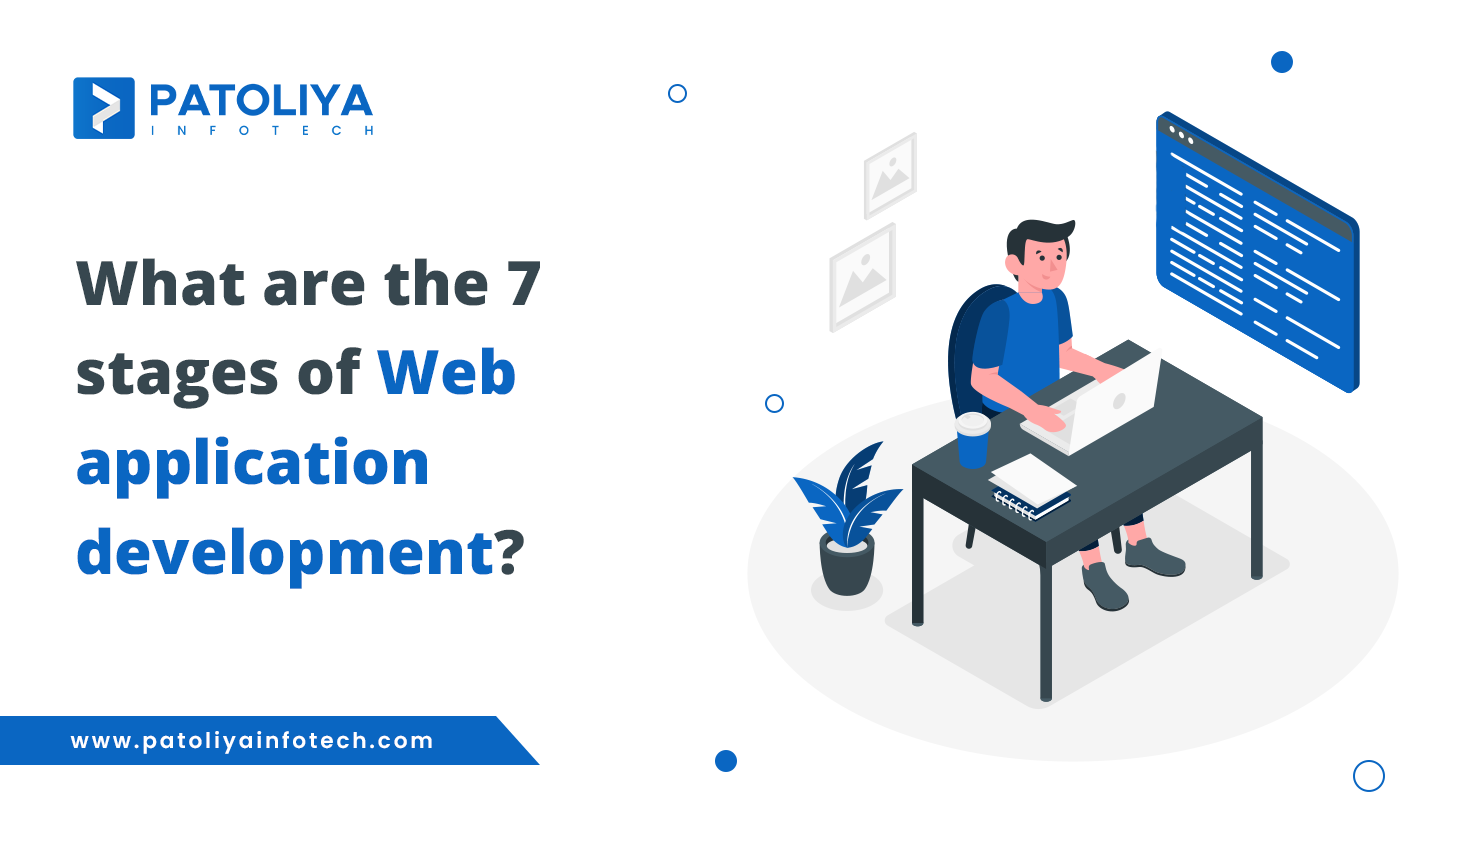 What are the 7 stages of web application development?